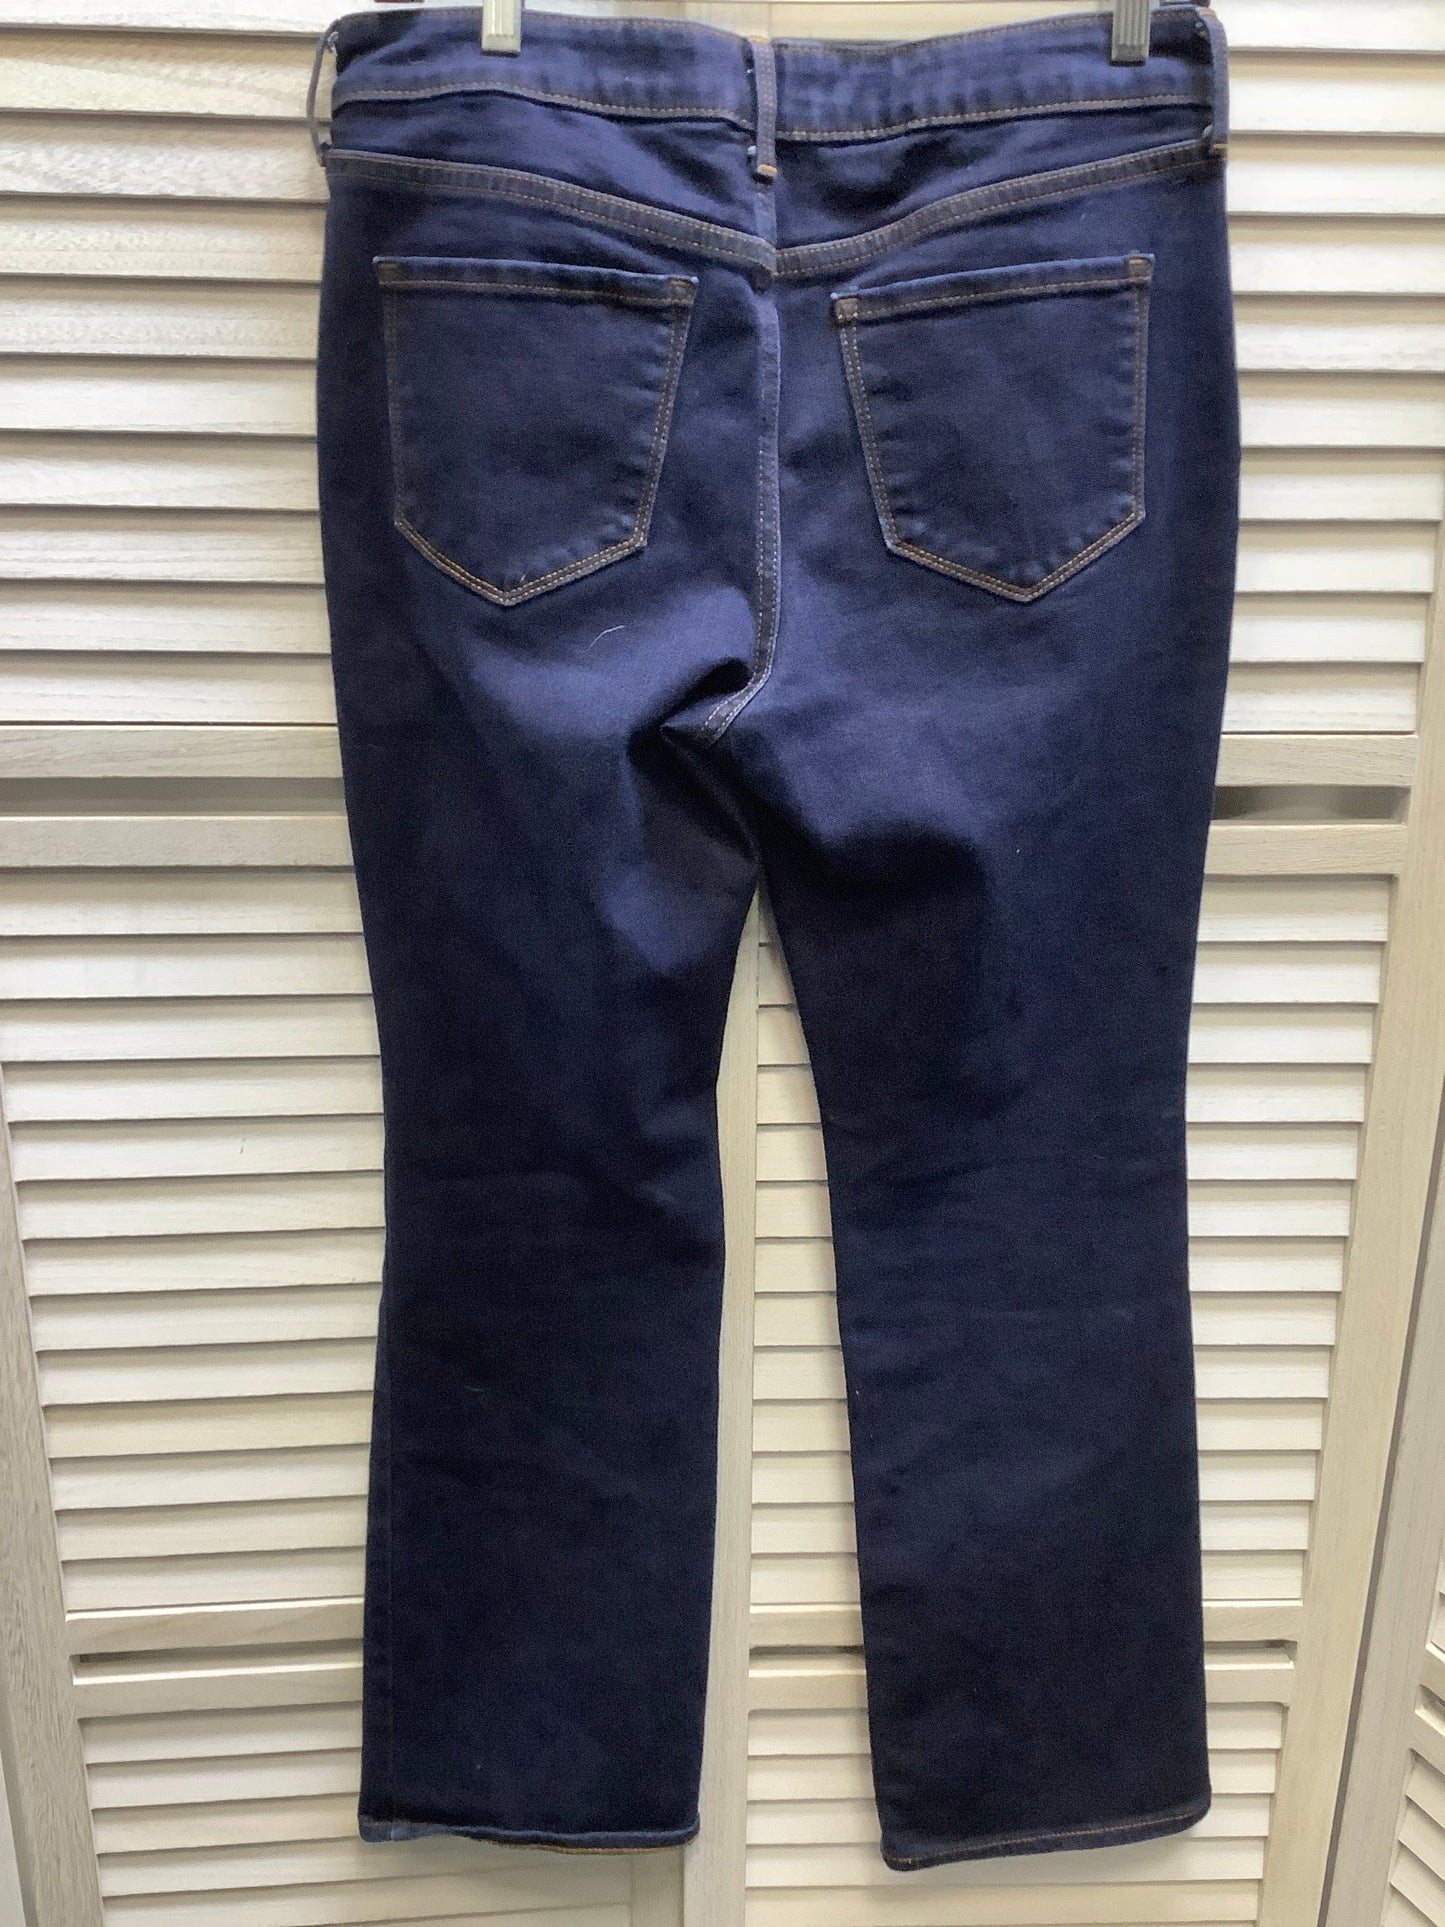 Blue Denim Jeans Boot Cut Old Navy, Size 10